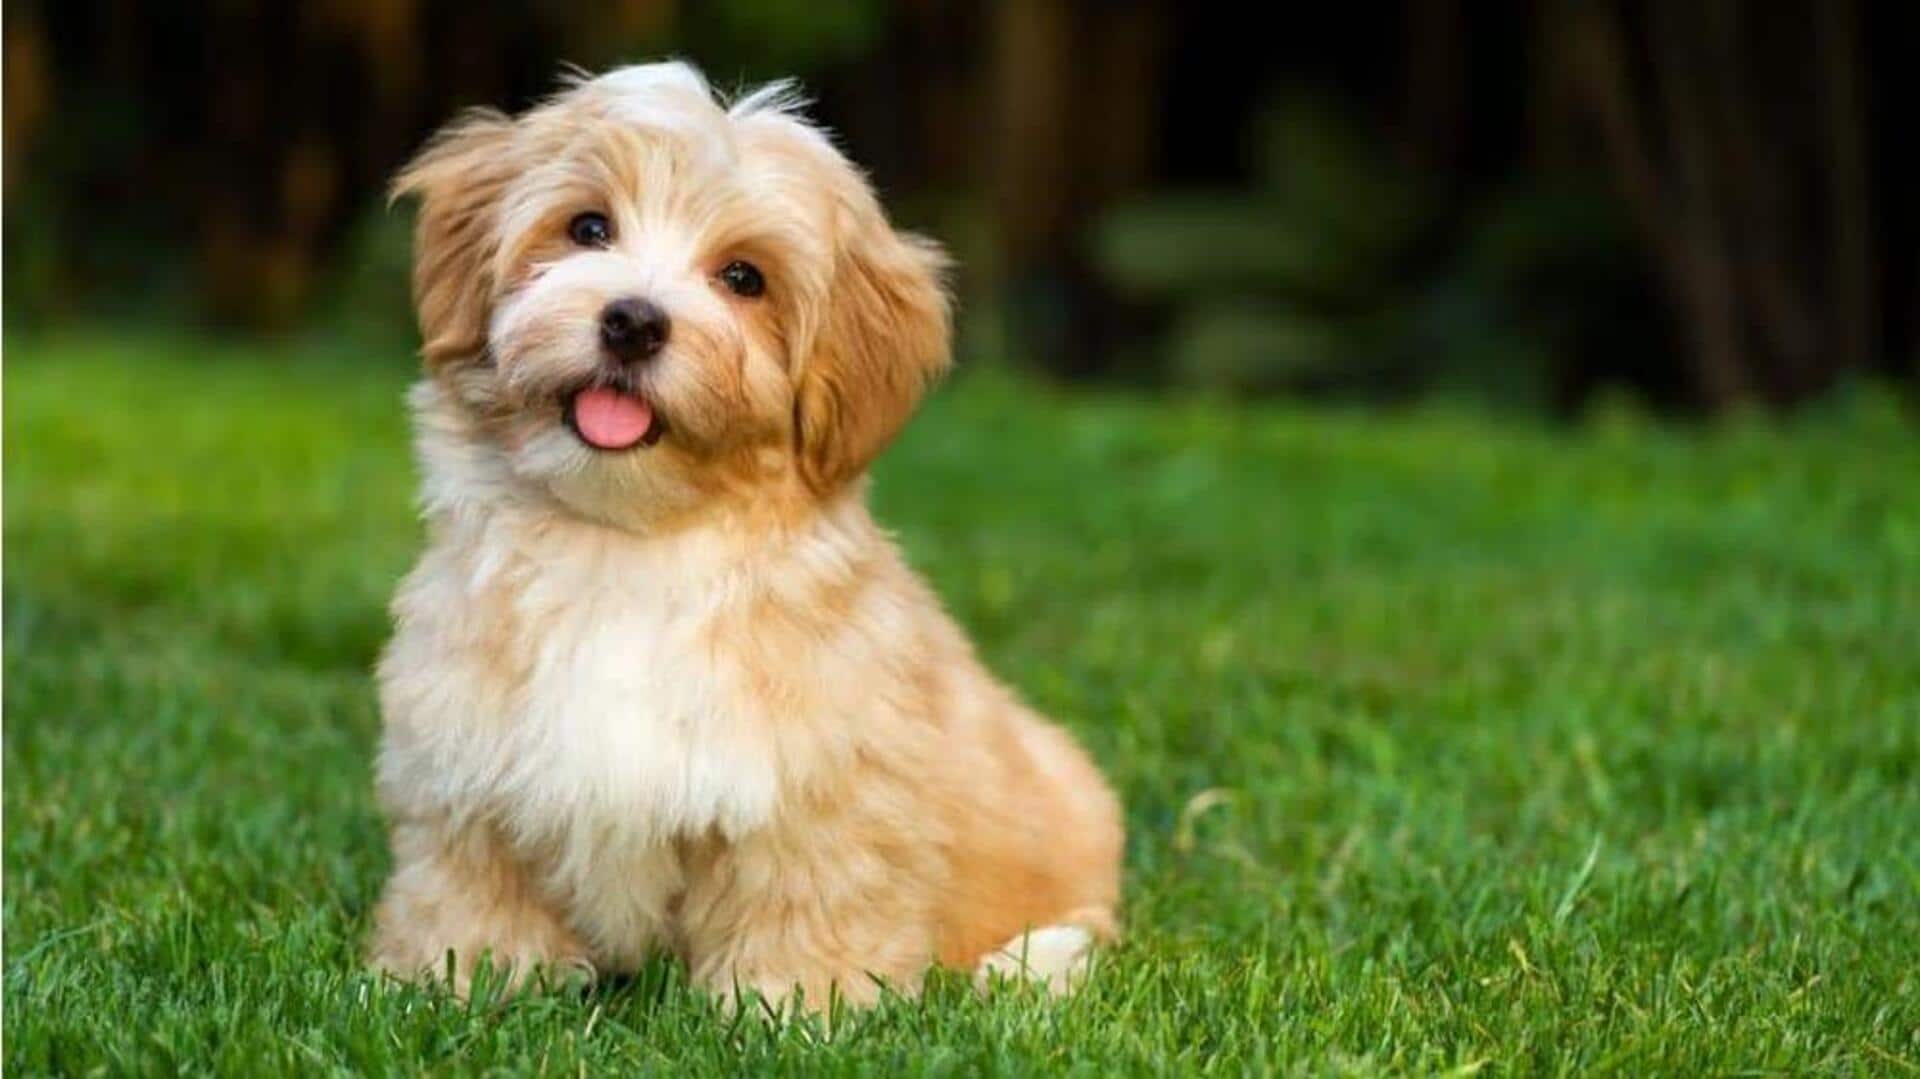 How to take care of your Havanese dog at home